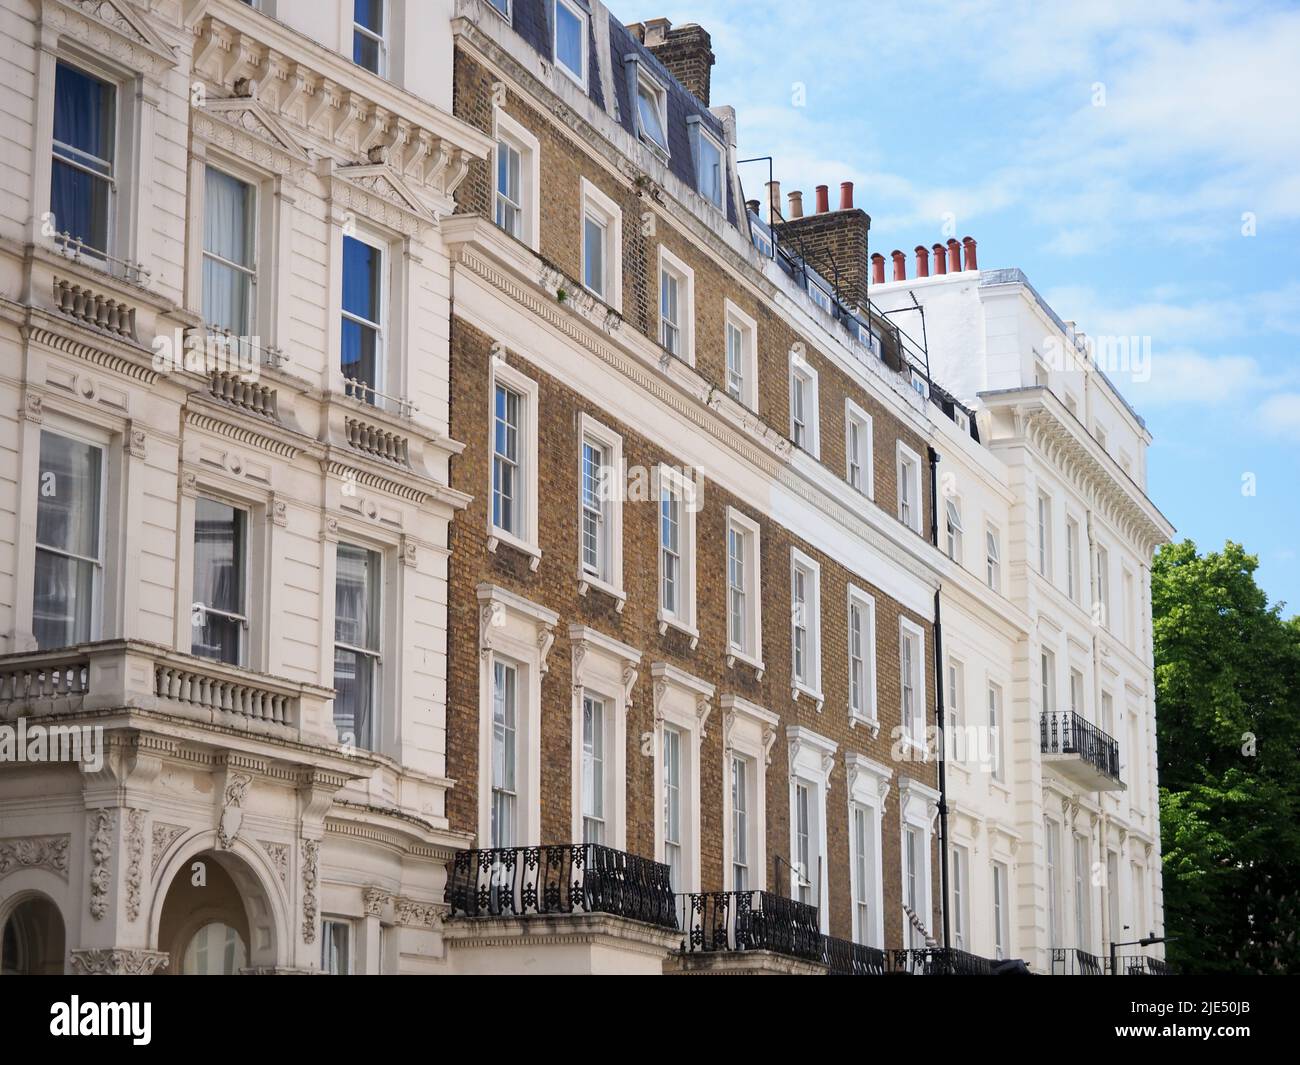 Details of a terrace of elegant and historic buildings in central London Stock Photo